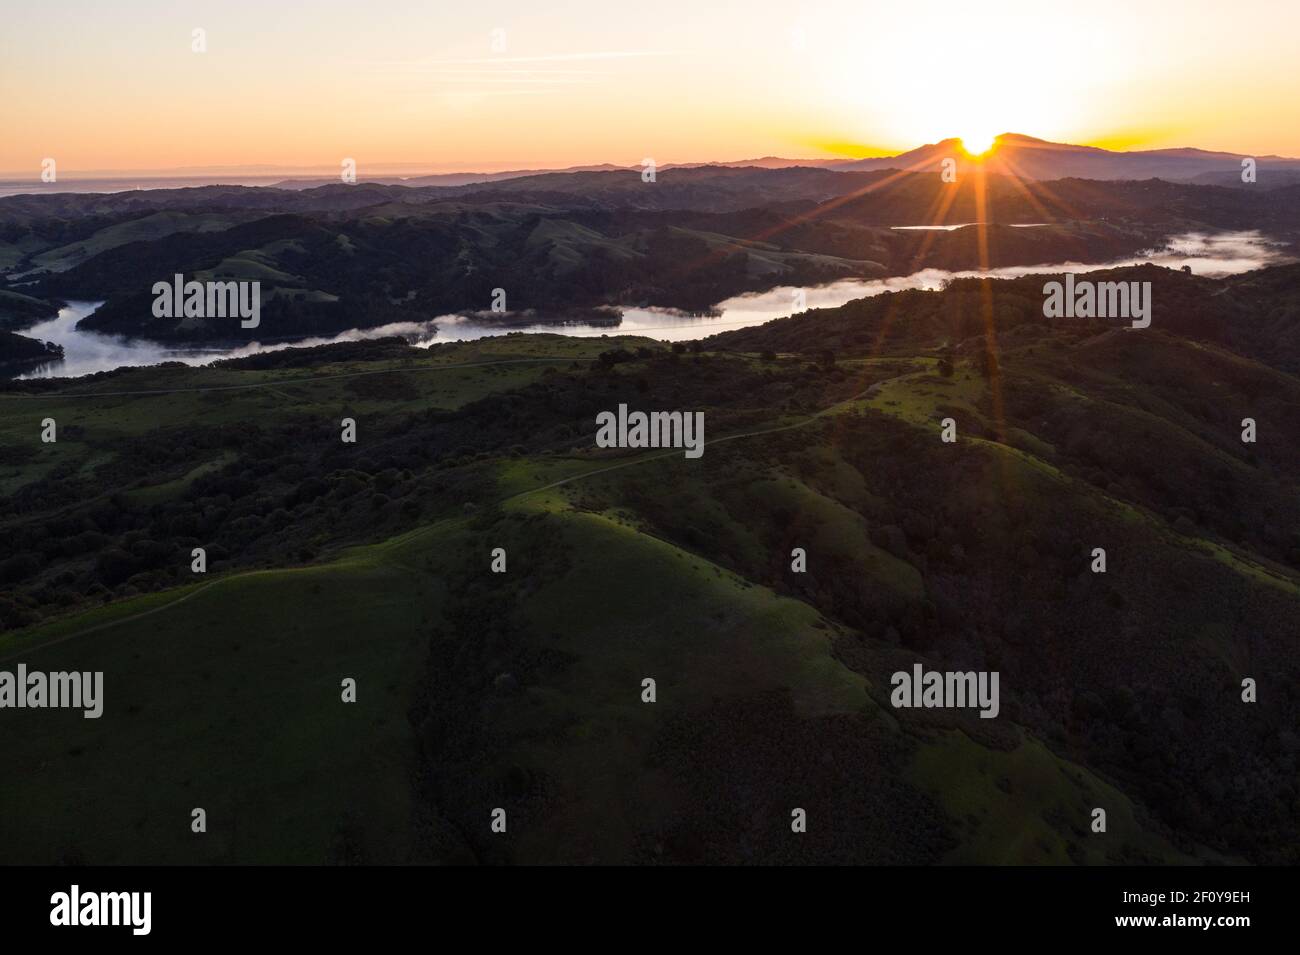 A brilliant sunrise greets the hills of the East Bay, not far from San Francisco Bay in California. Stock Photo